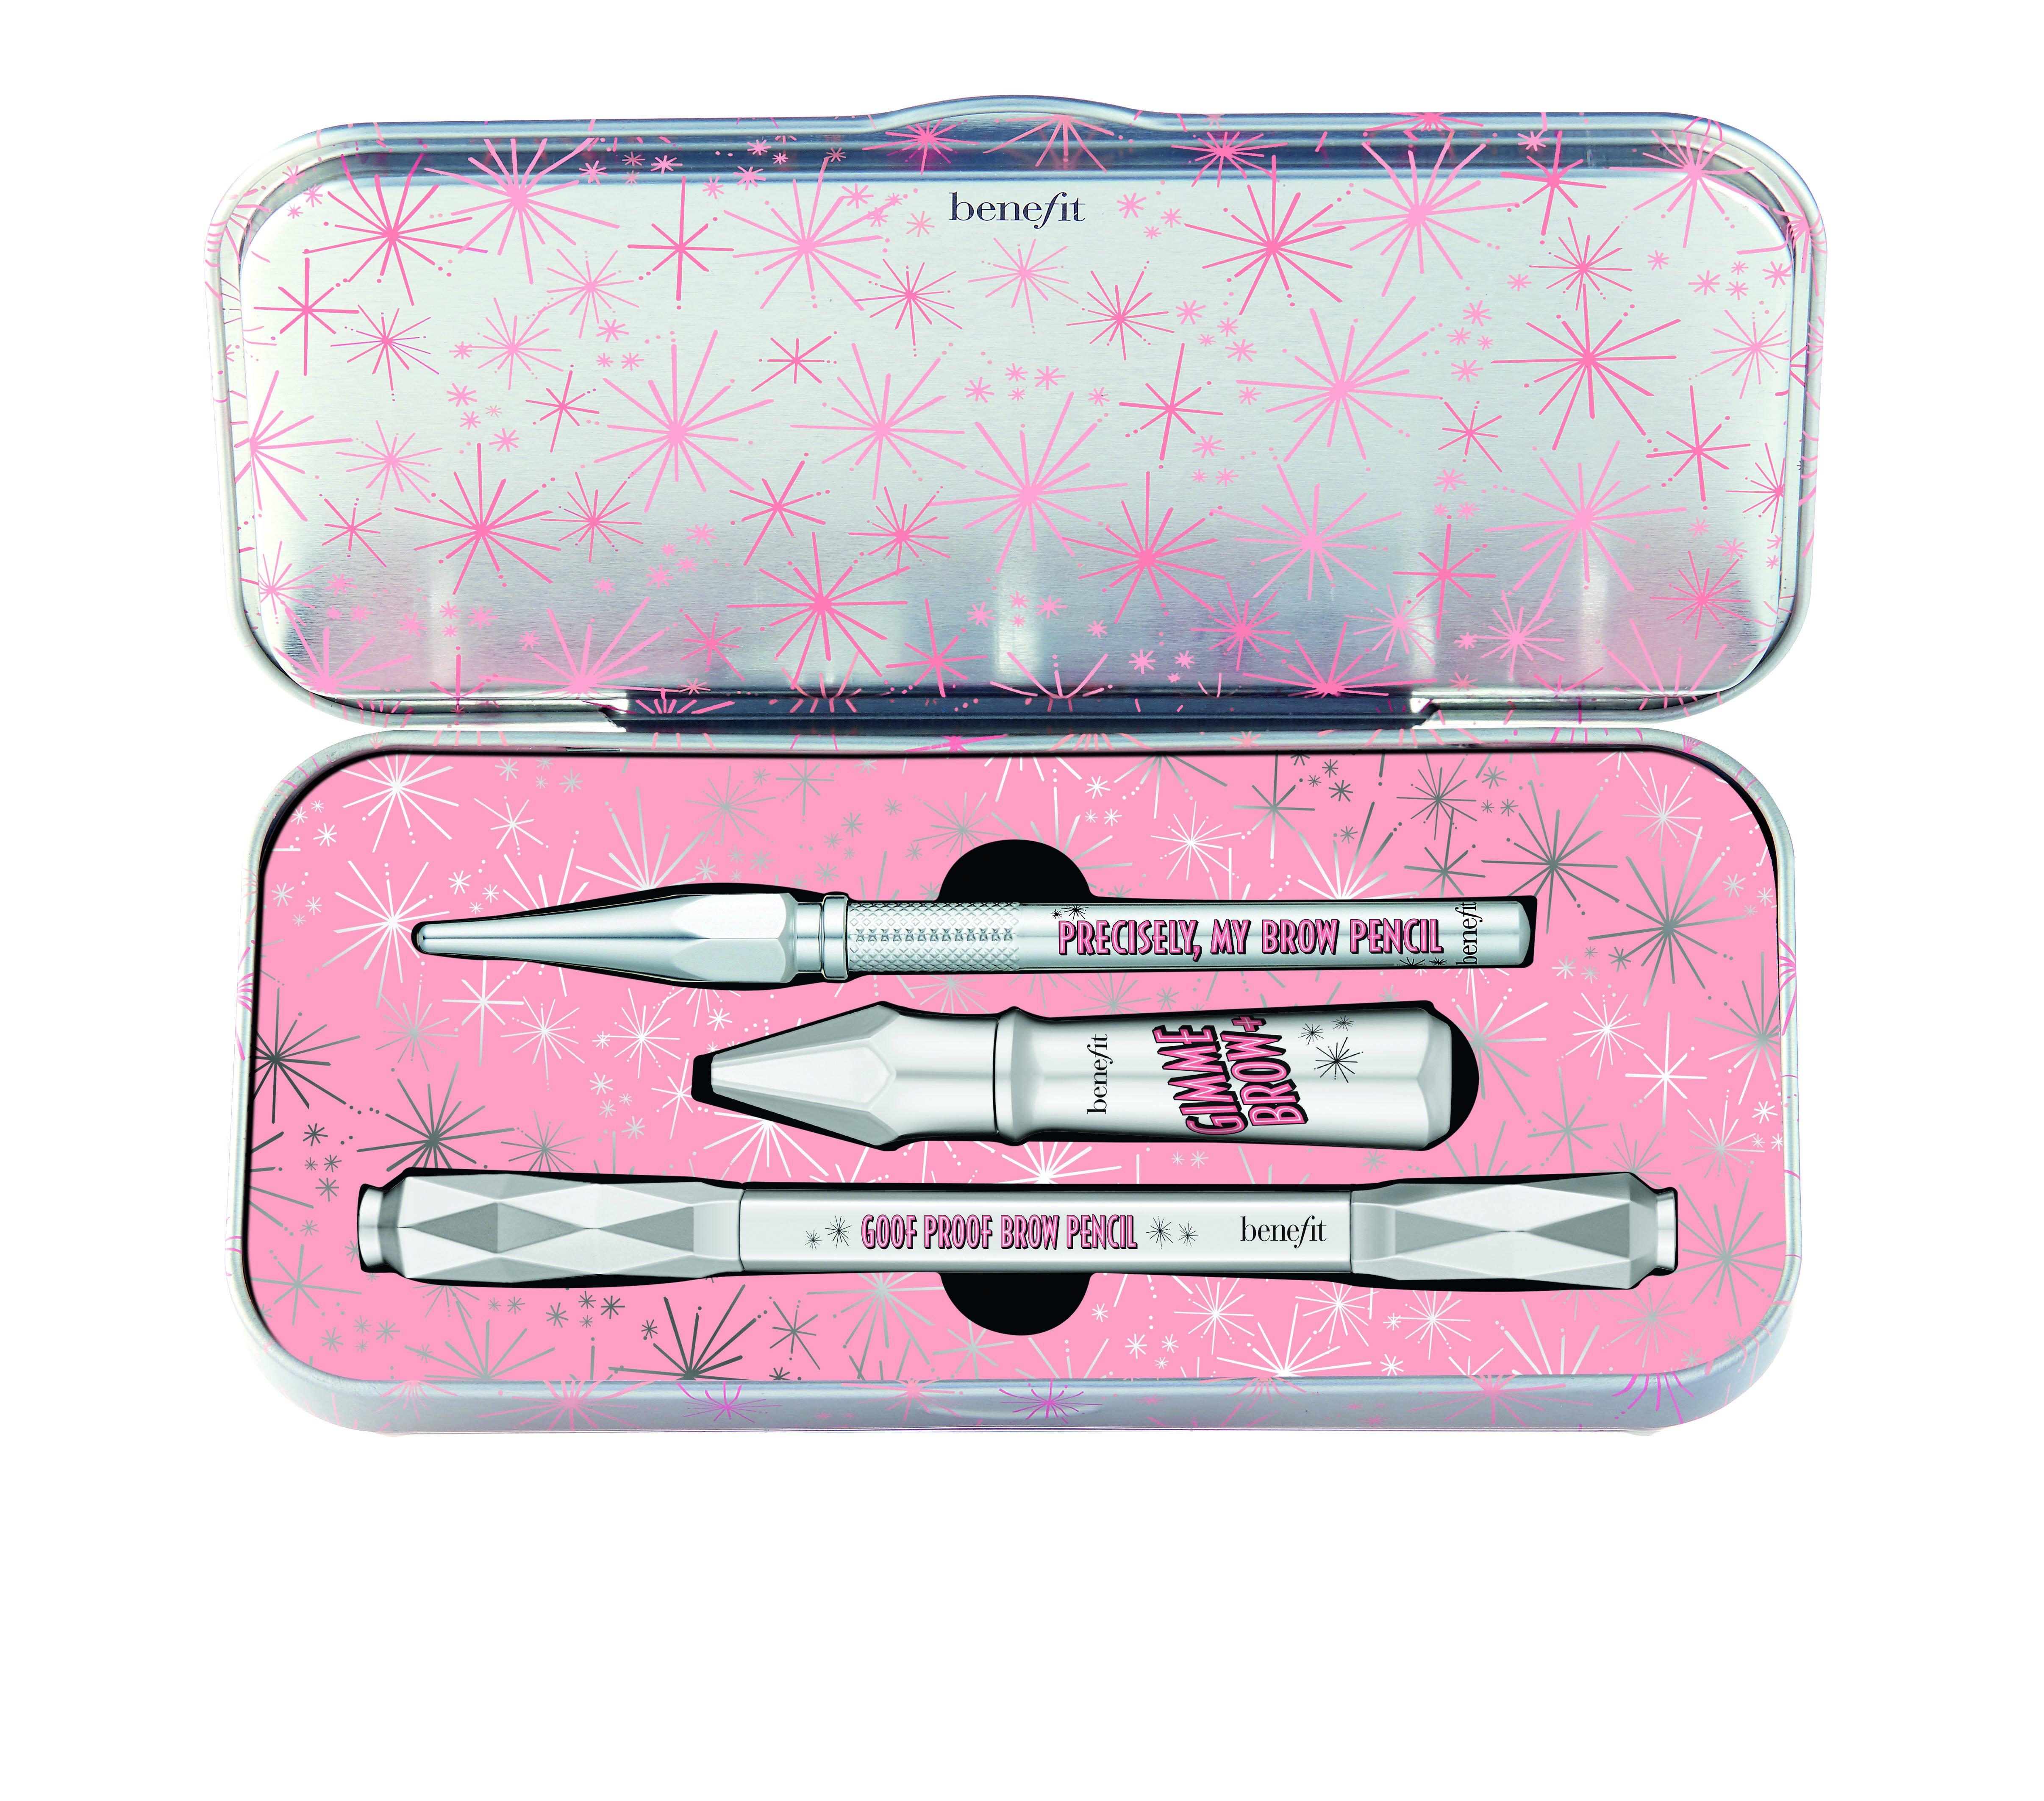 benefit The Great Brow Basic - Kit  